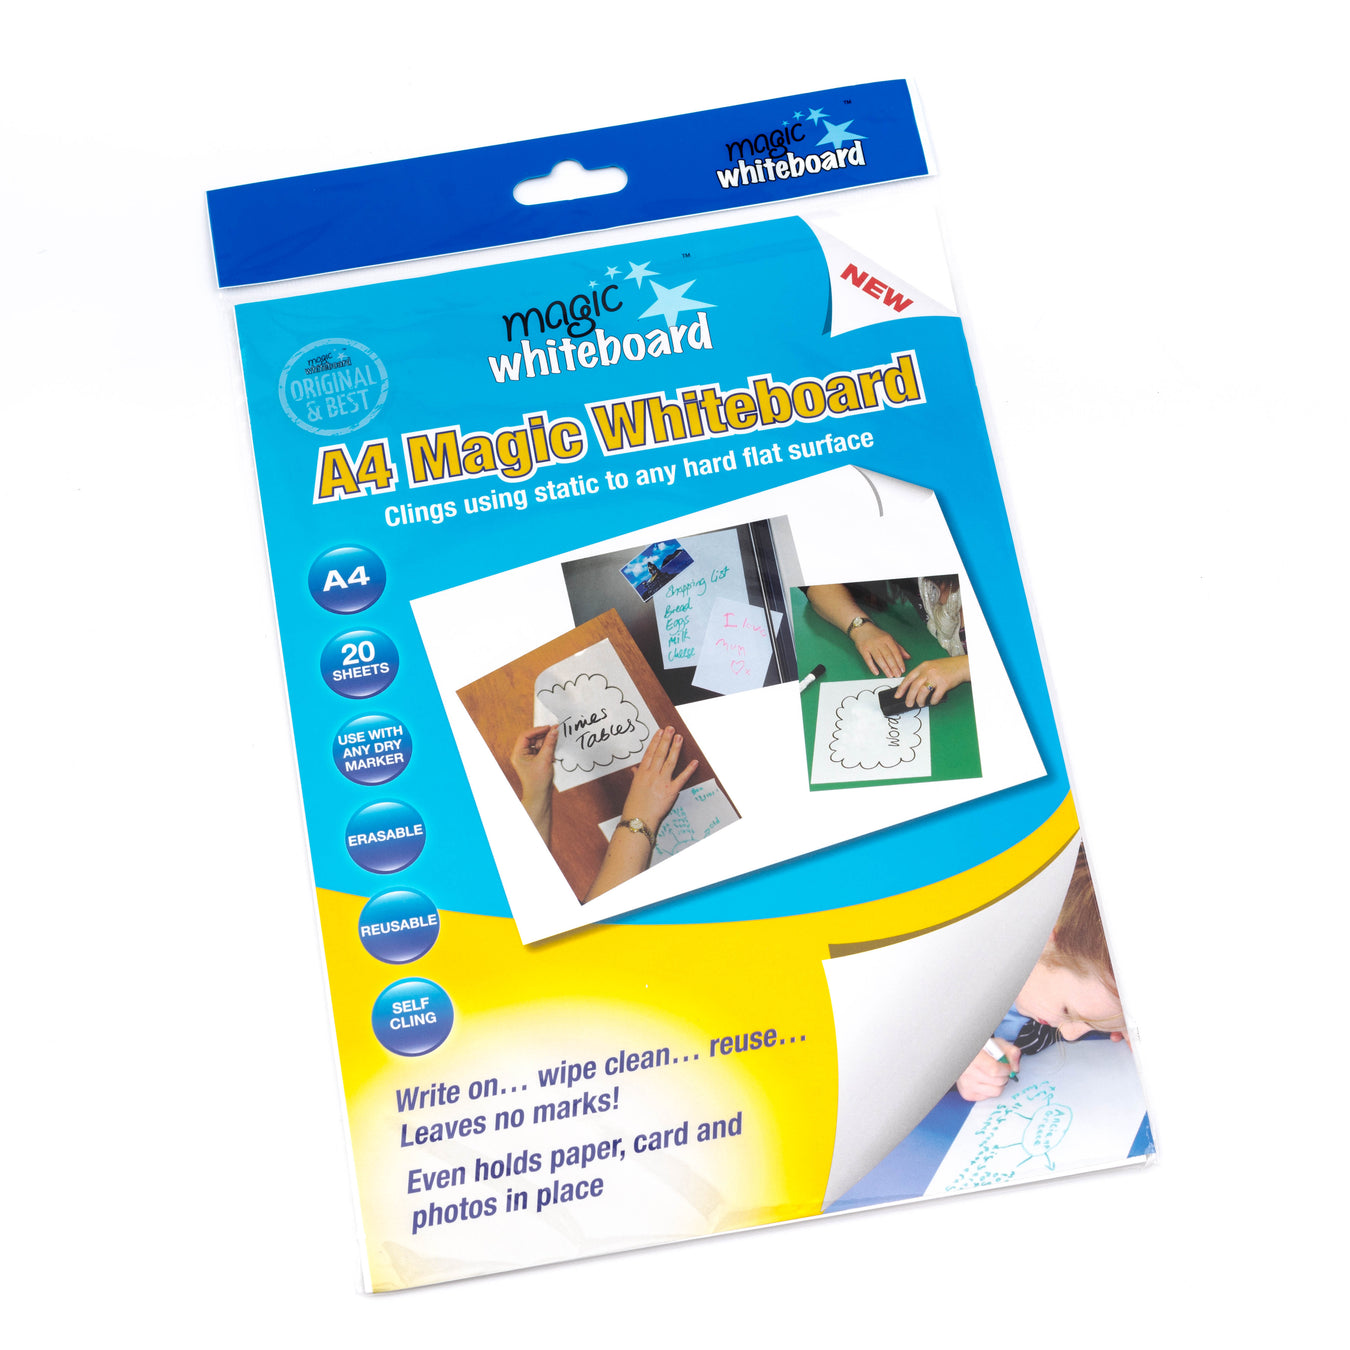 A4 & A2 Magic Whiteboards - Small Whiteboards